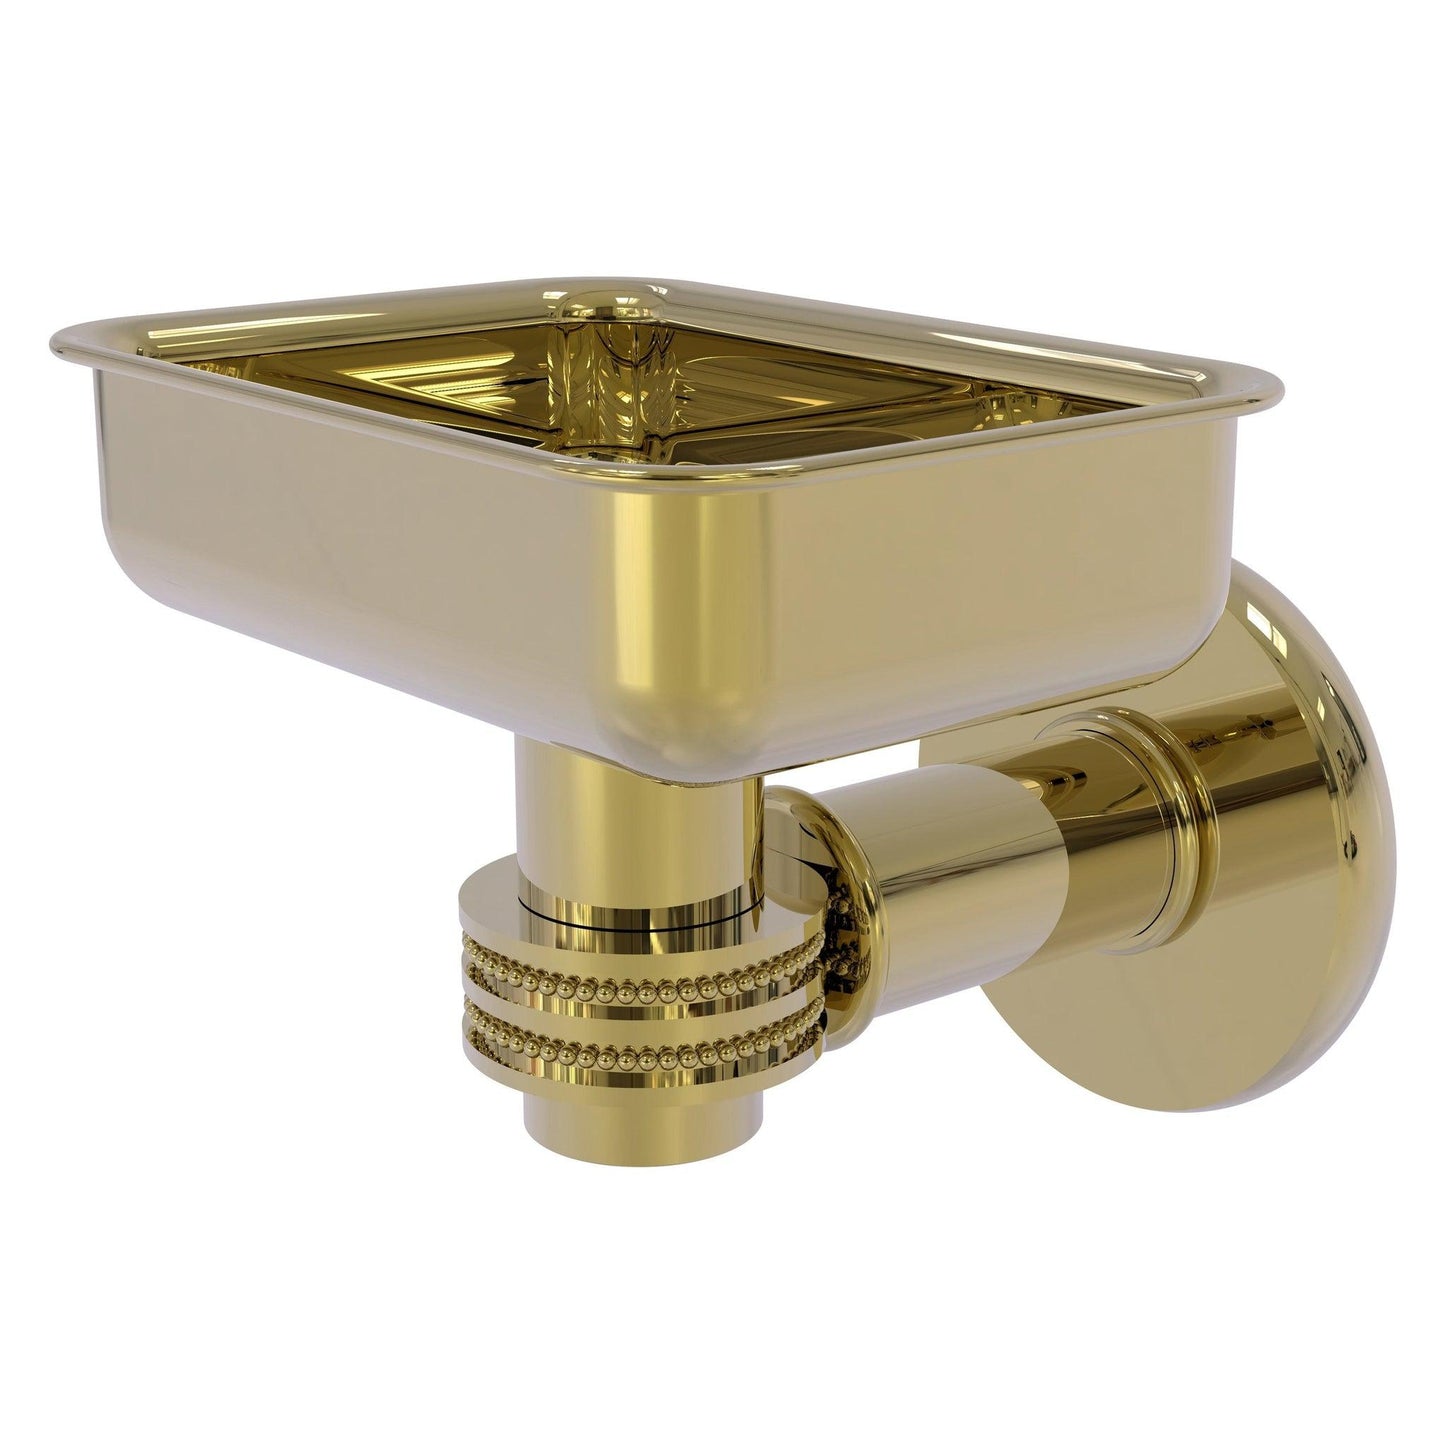 Allied Brass Continental 4.5" x 3.5" Unlacquered Brass Solid Brass Wall-Mounted Soap Dish Holder with Dotted Accents